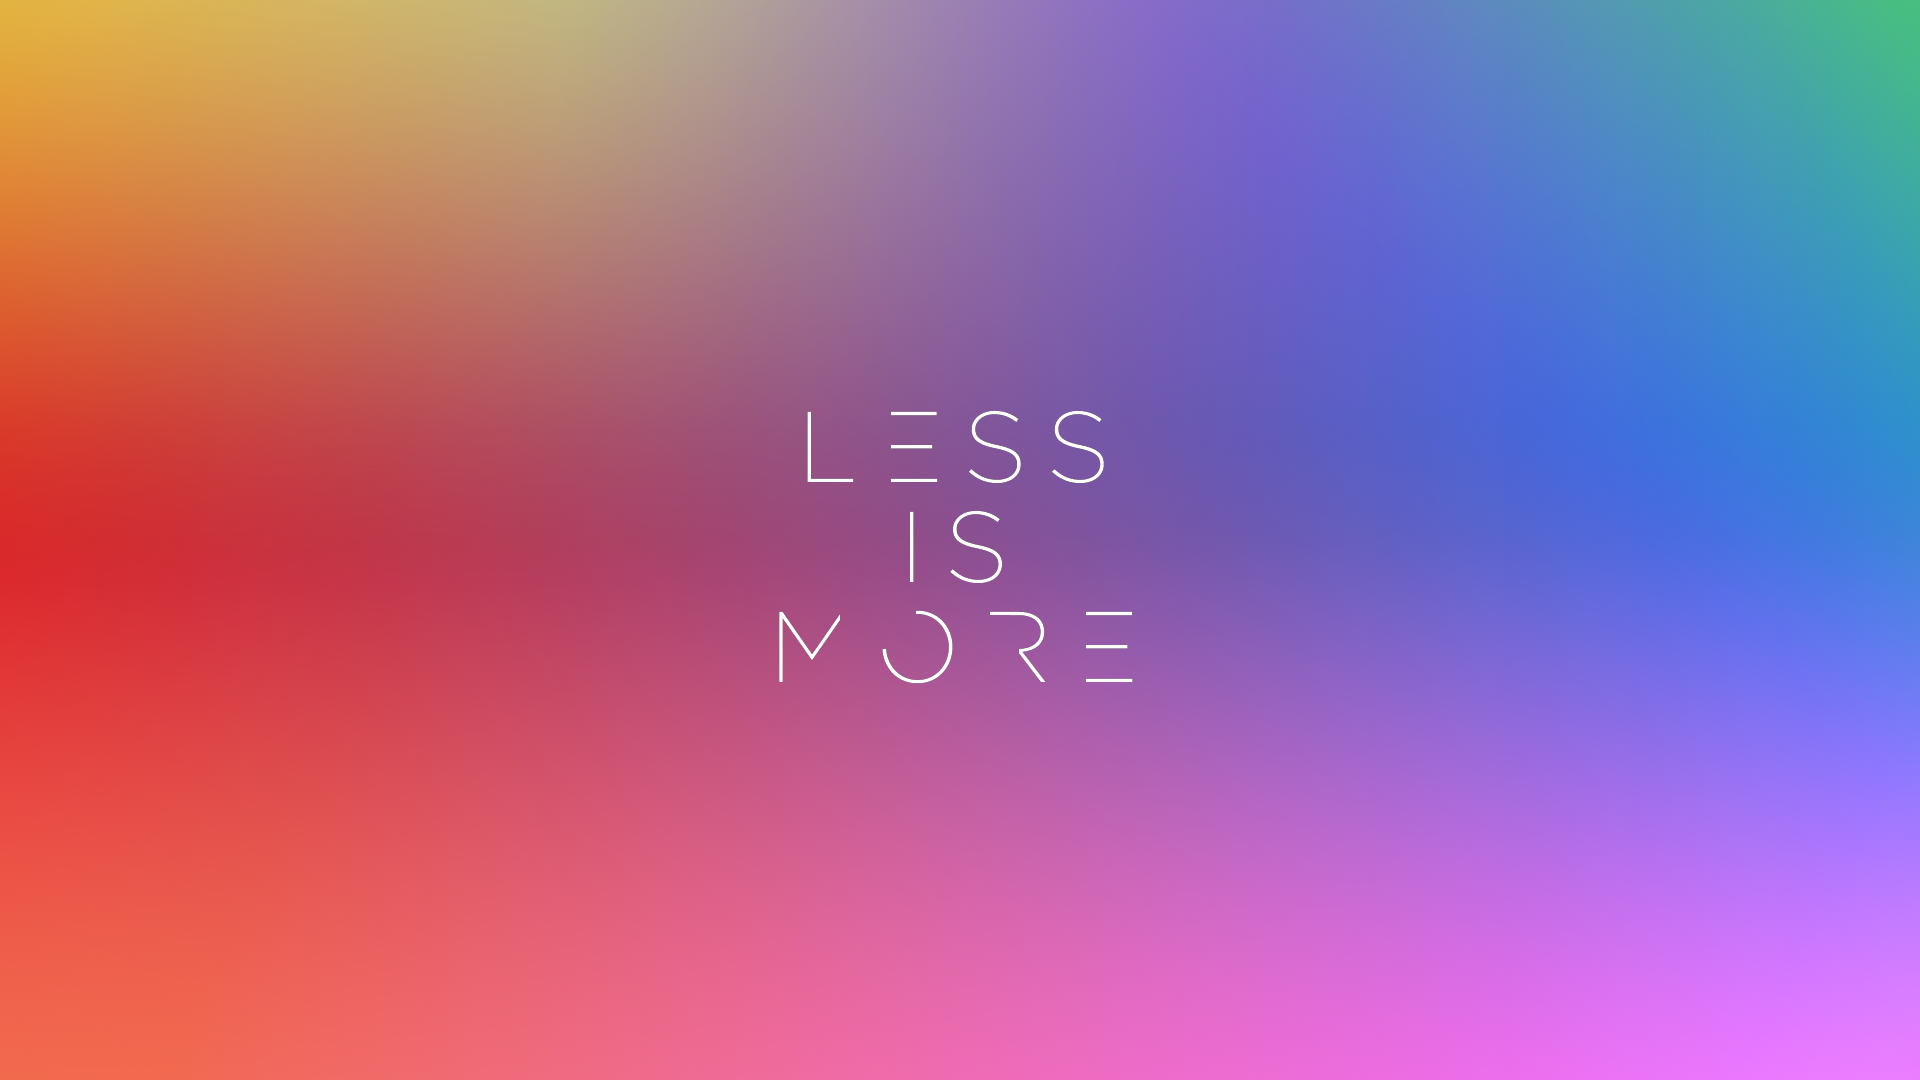 Less is more 2